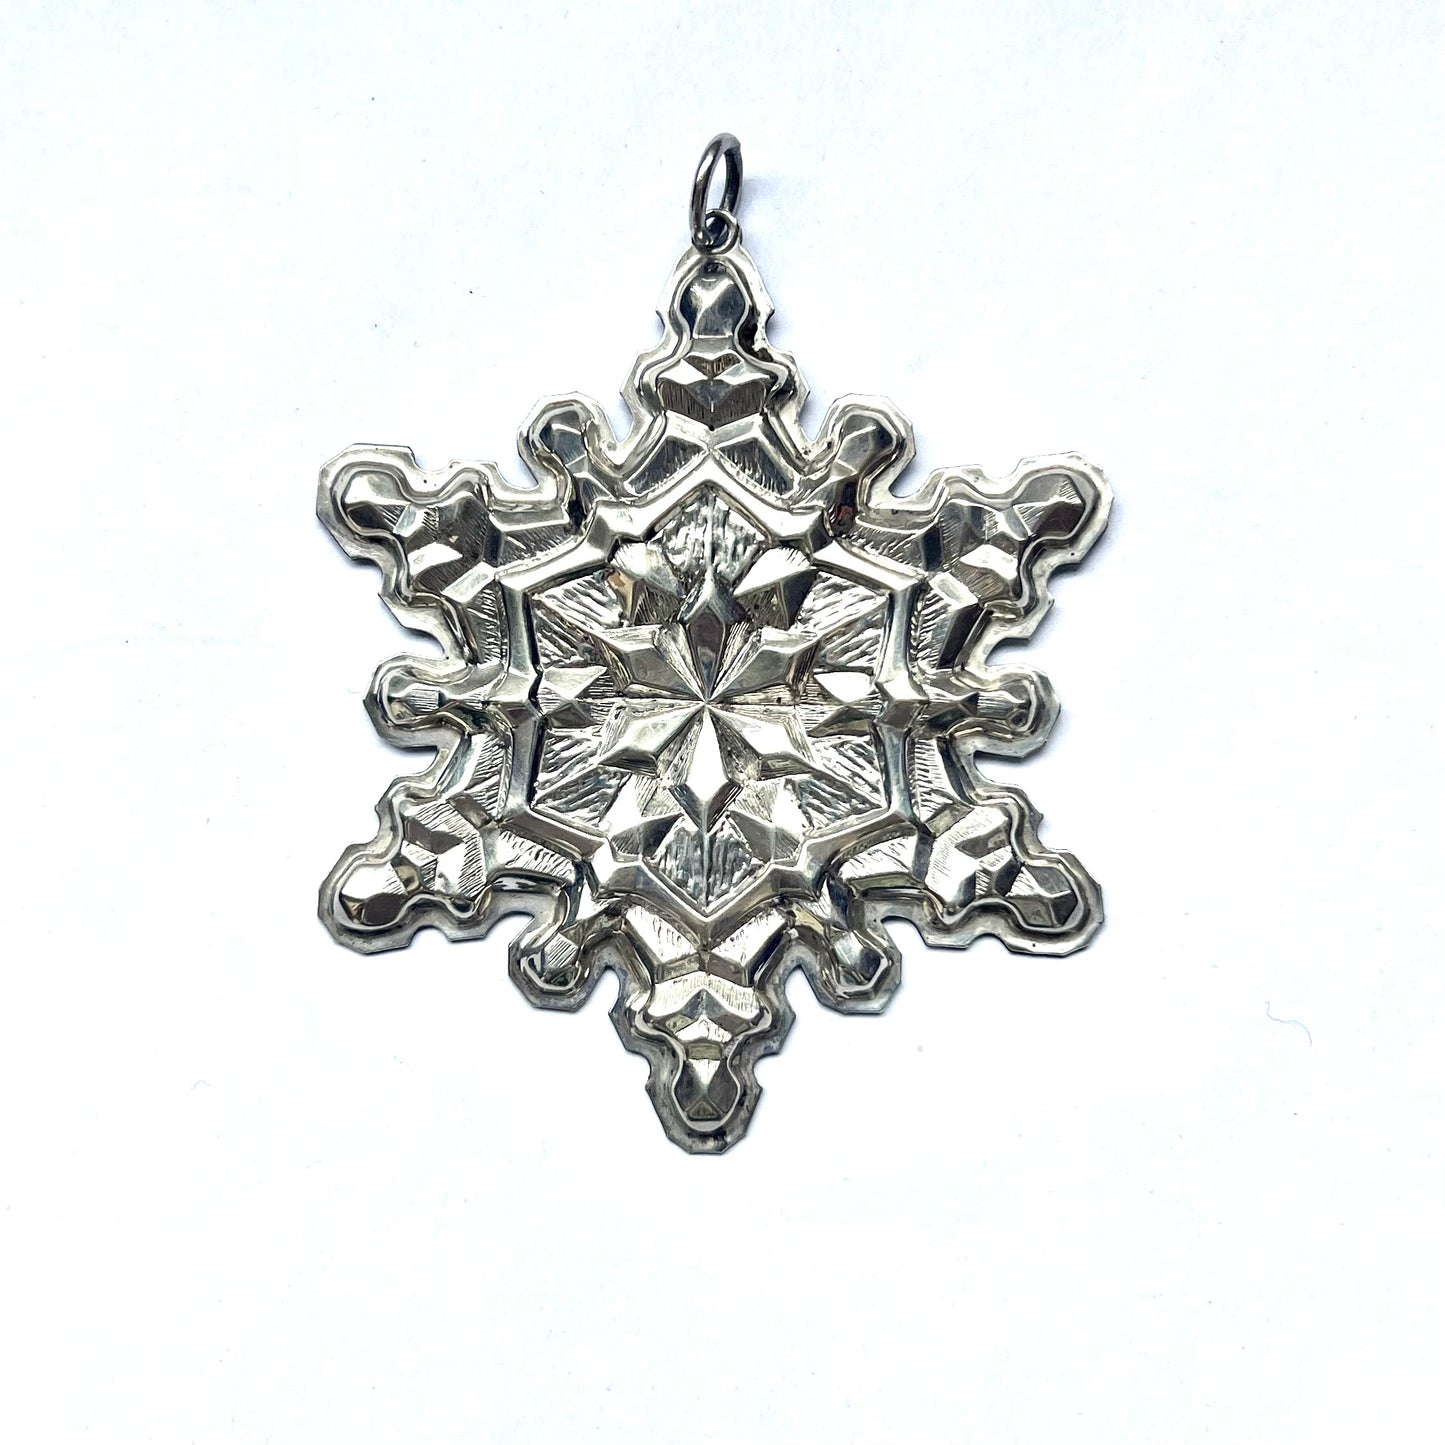 #2- Vintage Sterling Silver 1970s Figural Snowflake ornaments by Gorham